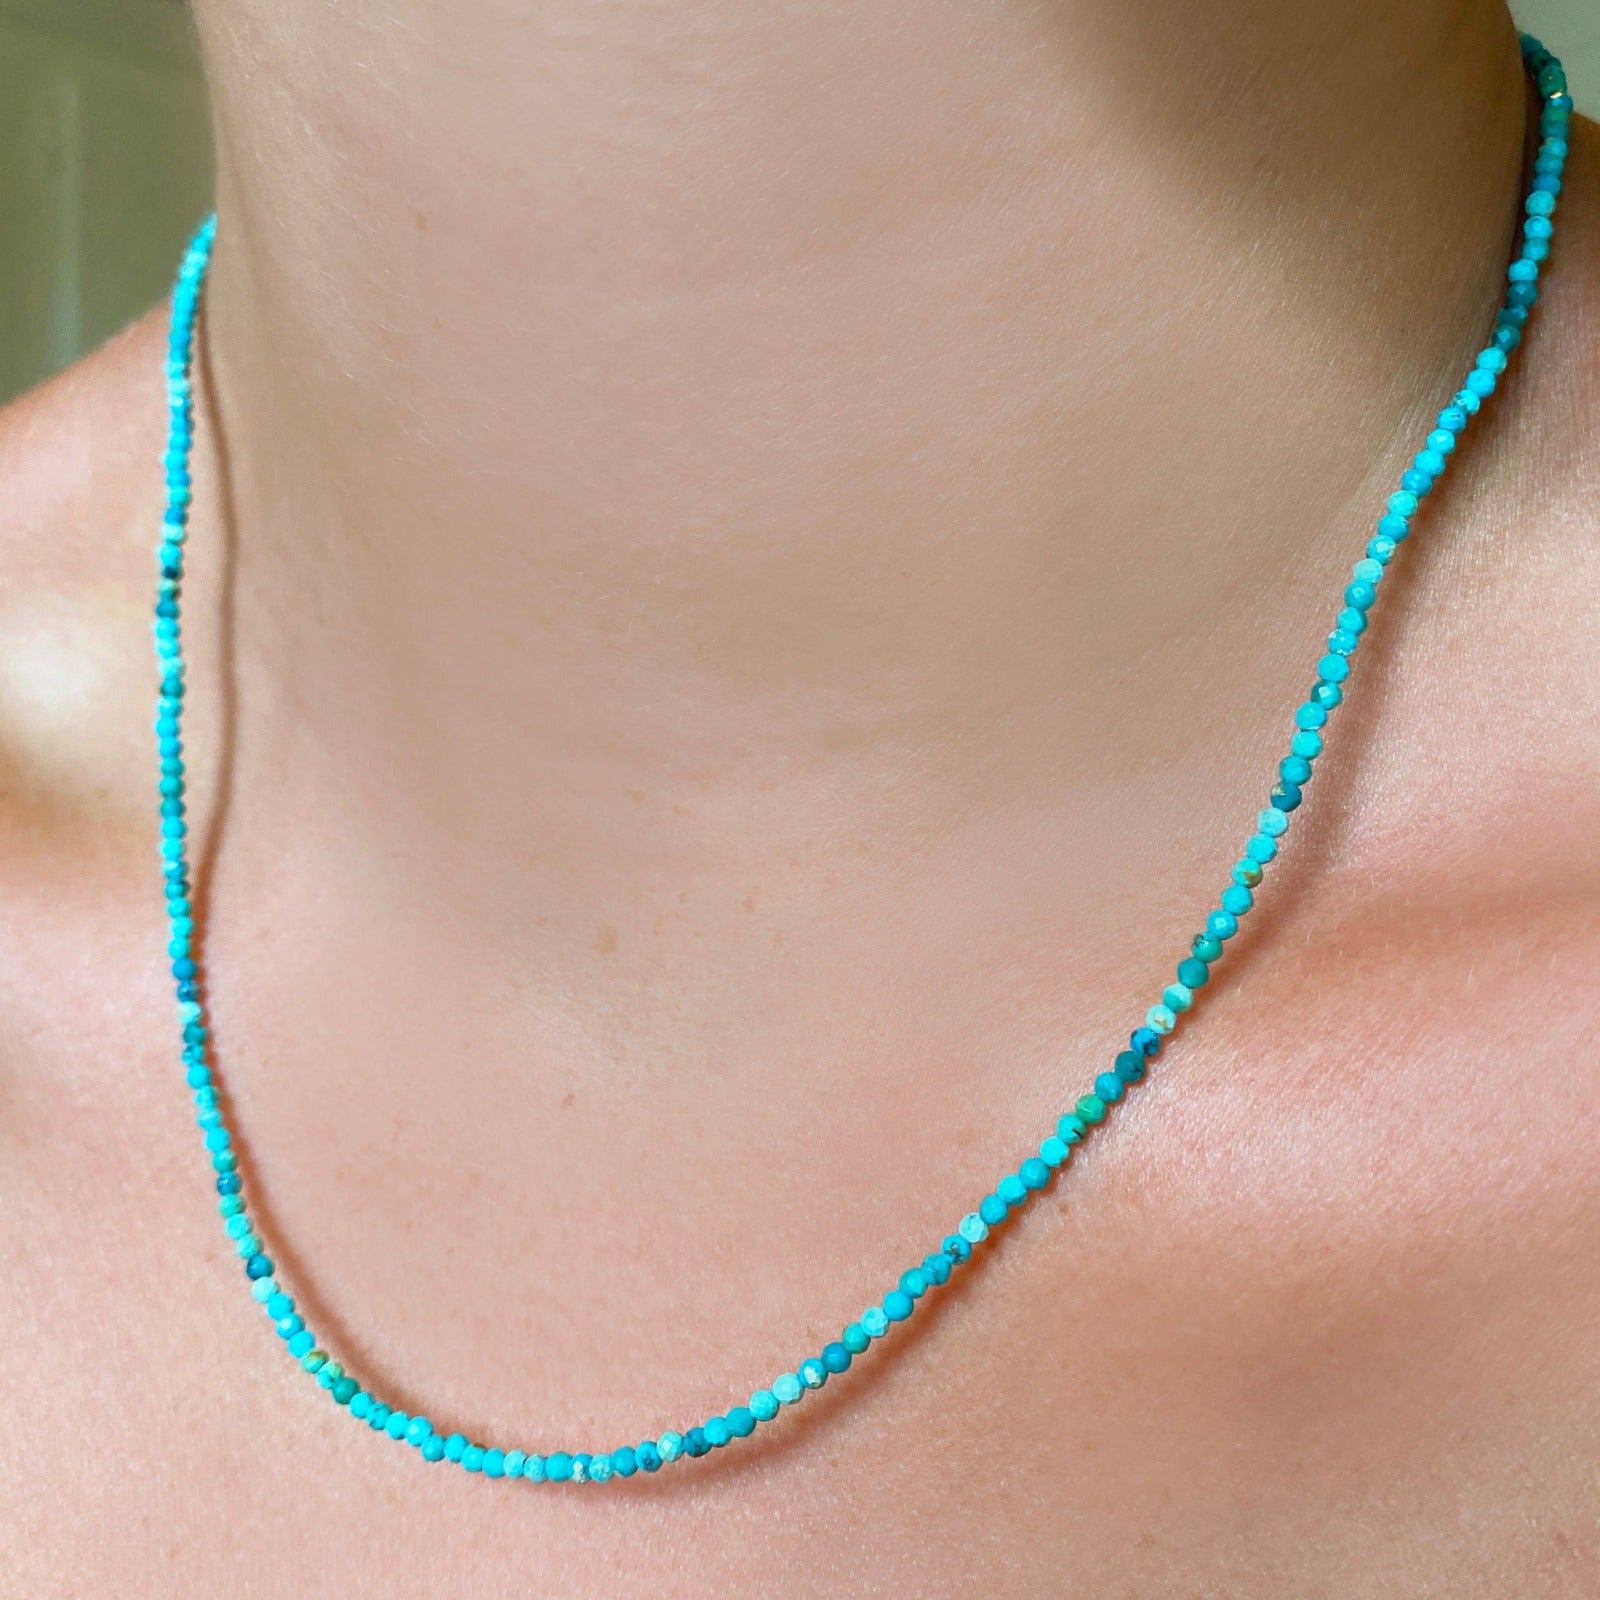 Shimmering beaded necklace made of 2mm faceted opals in shades of turquoise on a gold linking lobster clasp.